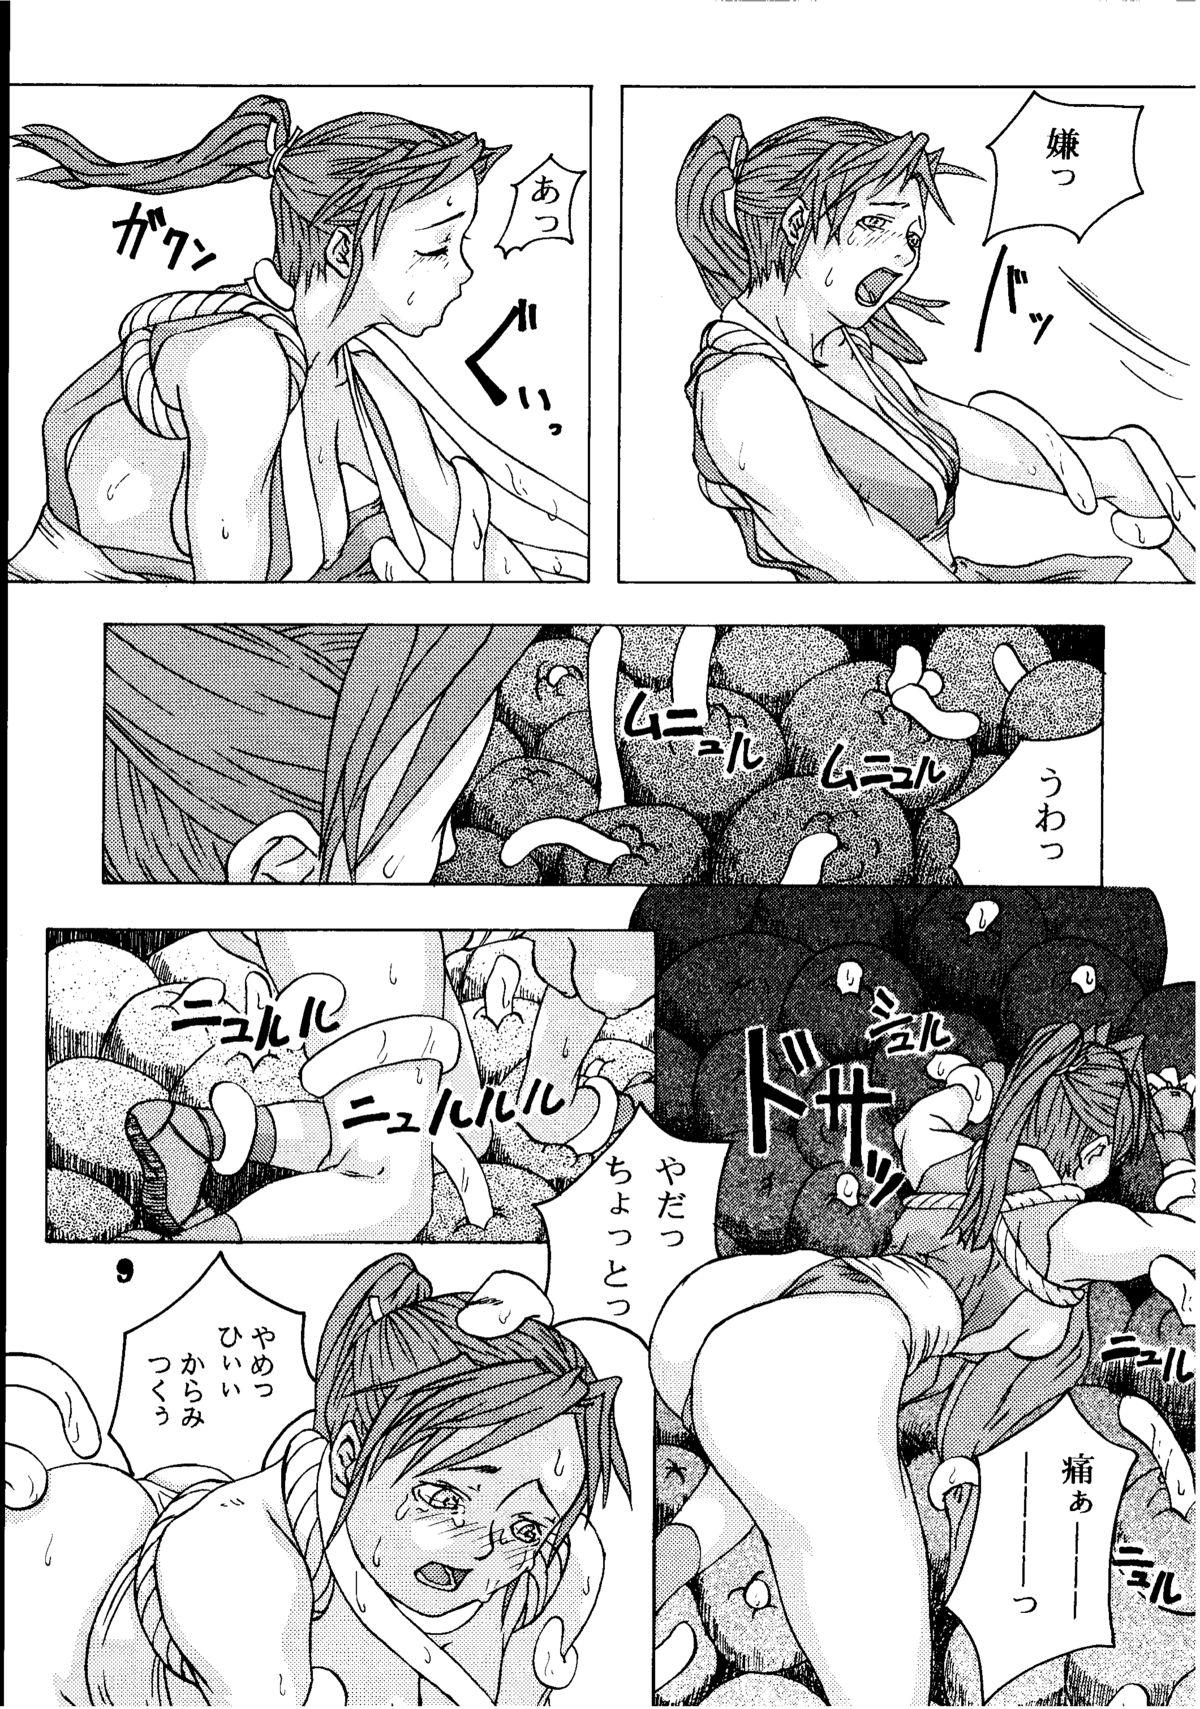 Butt Fuck Agi - King of fighters Gostosas - Page 9